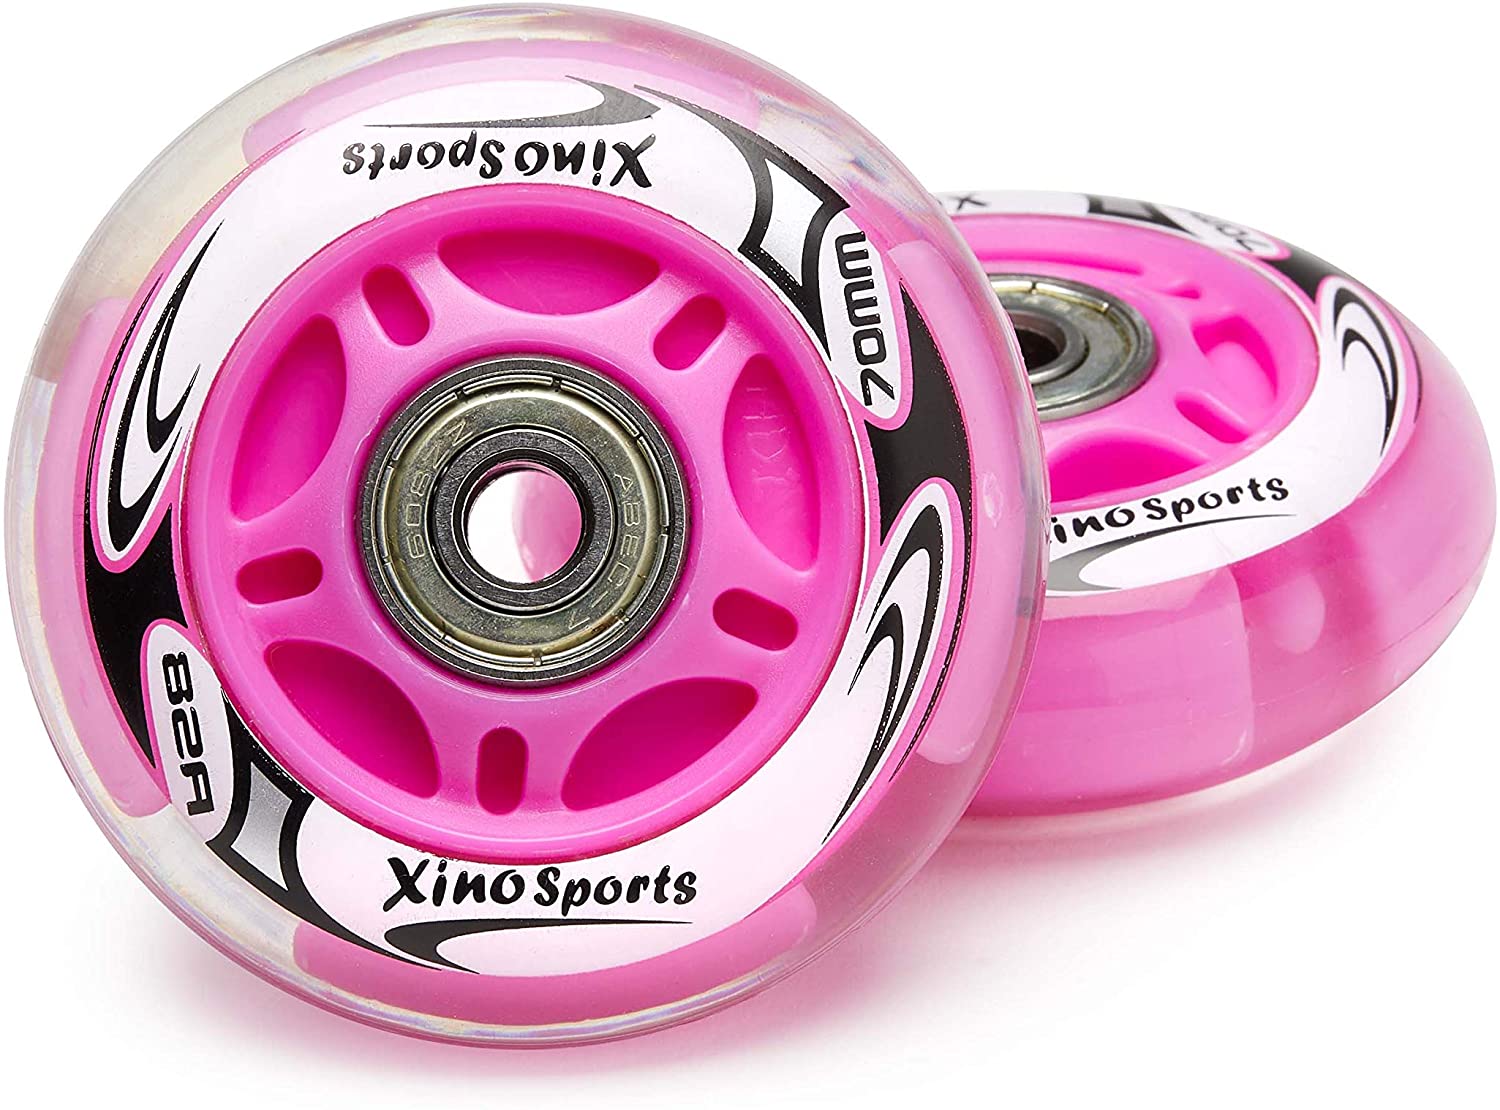 Xino Sports Inline Skates Replacement Wheels with LED Illuminating Lights, Bearings Included, Pack of 2 (Fuchsia) - Xino Sports